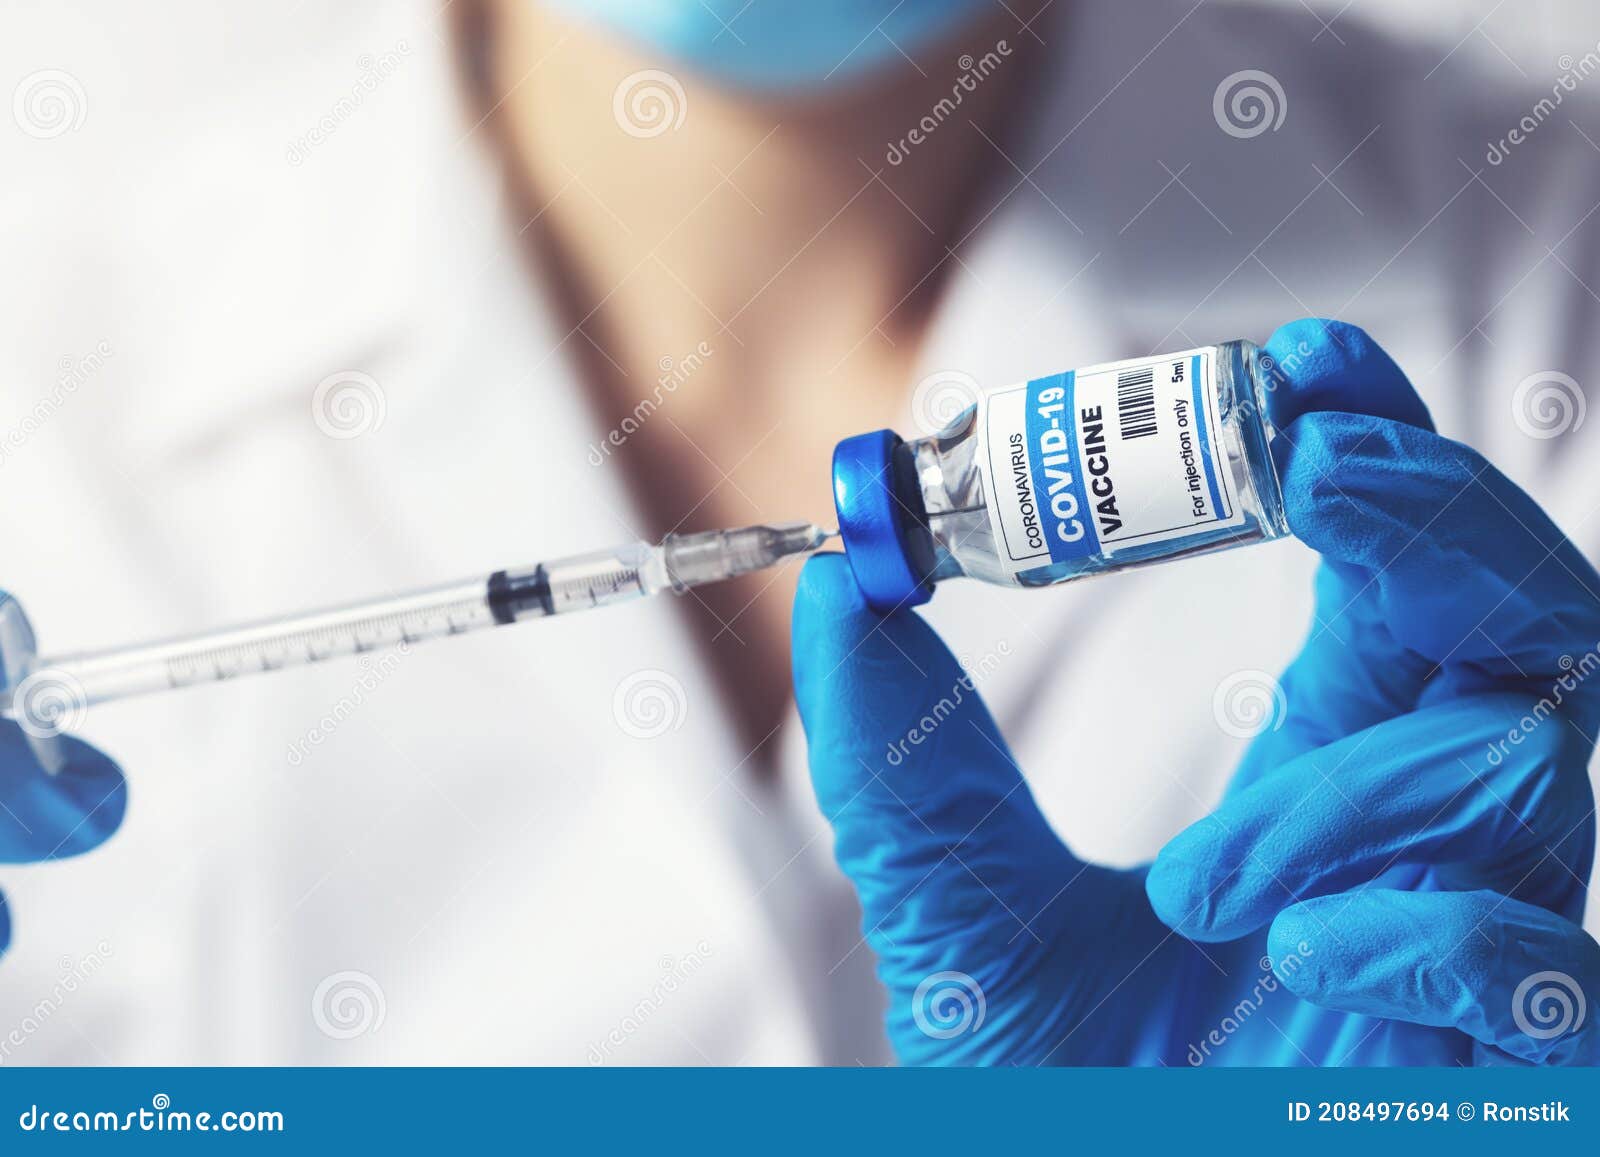 doctor preparing covid-19 vaccine dose for vaccination. closeup of syringe and vial in hands